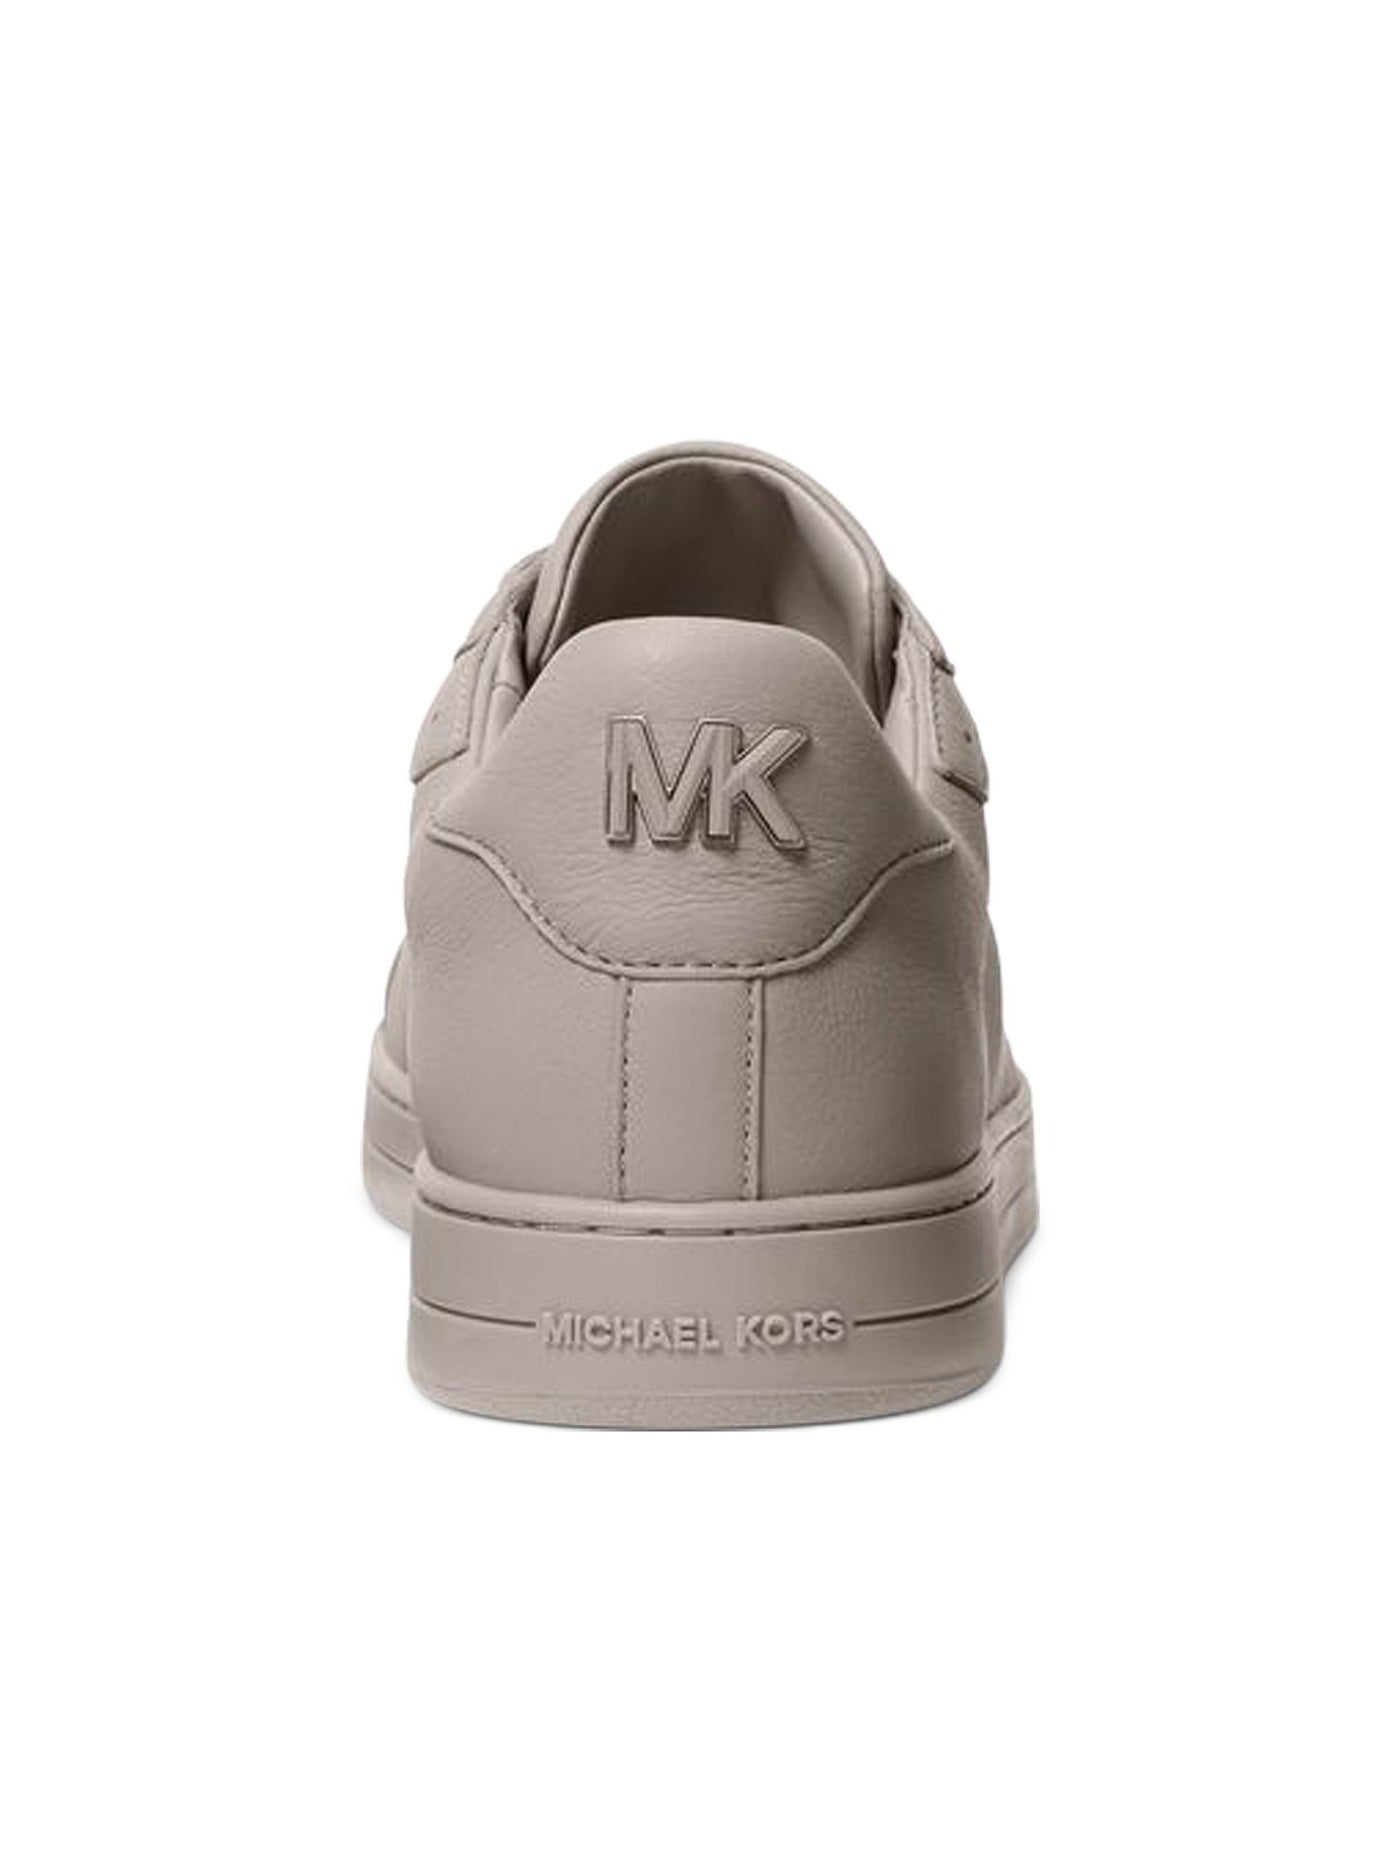 MICHAEL KORS Mens Gray Logos At Tongue, Heel And Under Lace Guard Comfort Padded Keating Round Toe Lace-Up Leather Sneakers Shoes 10.5 M